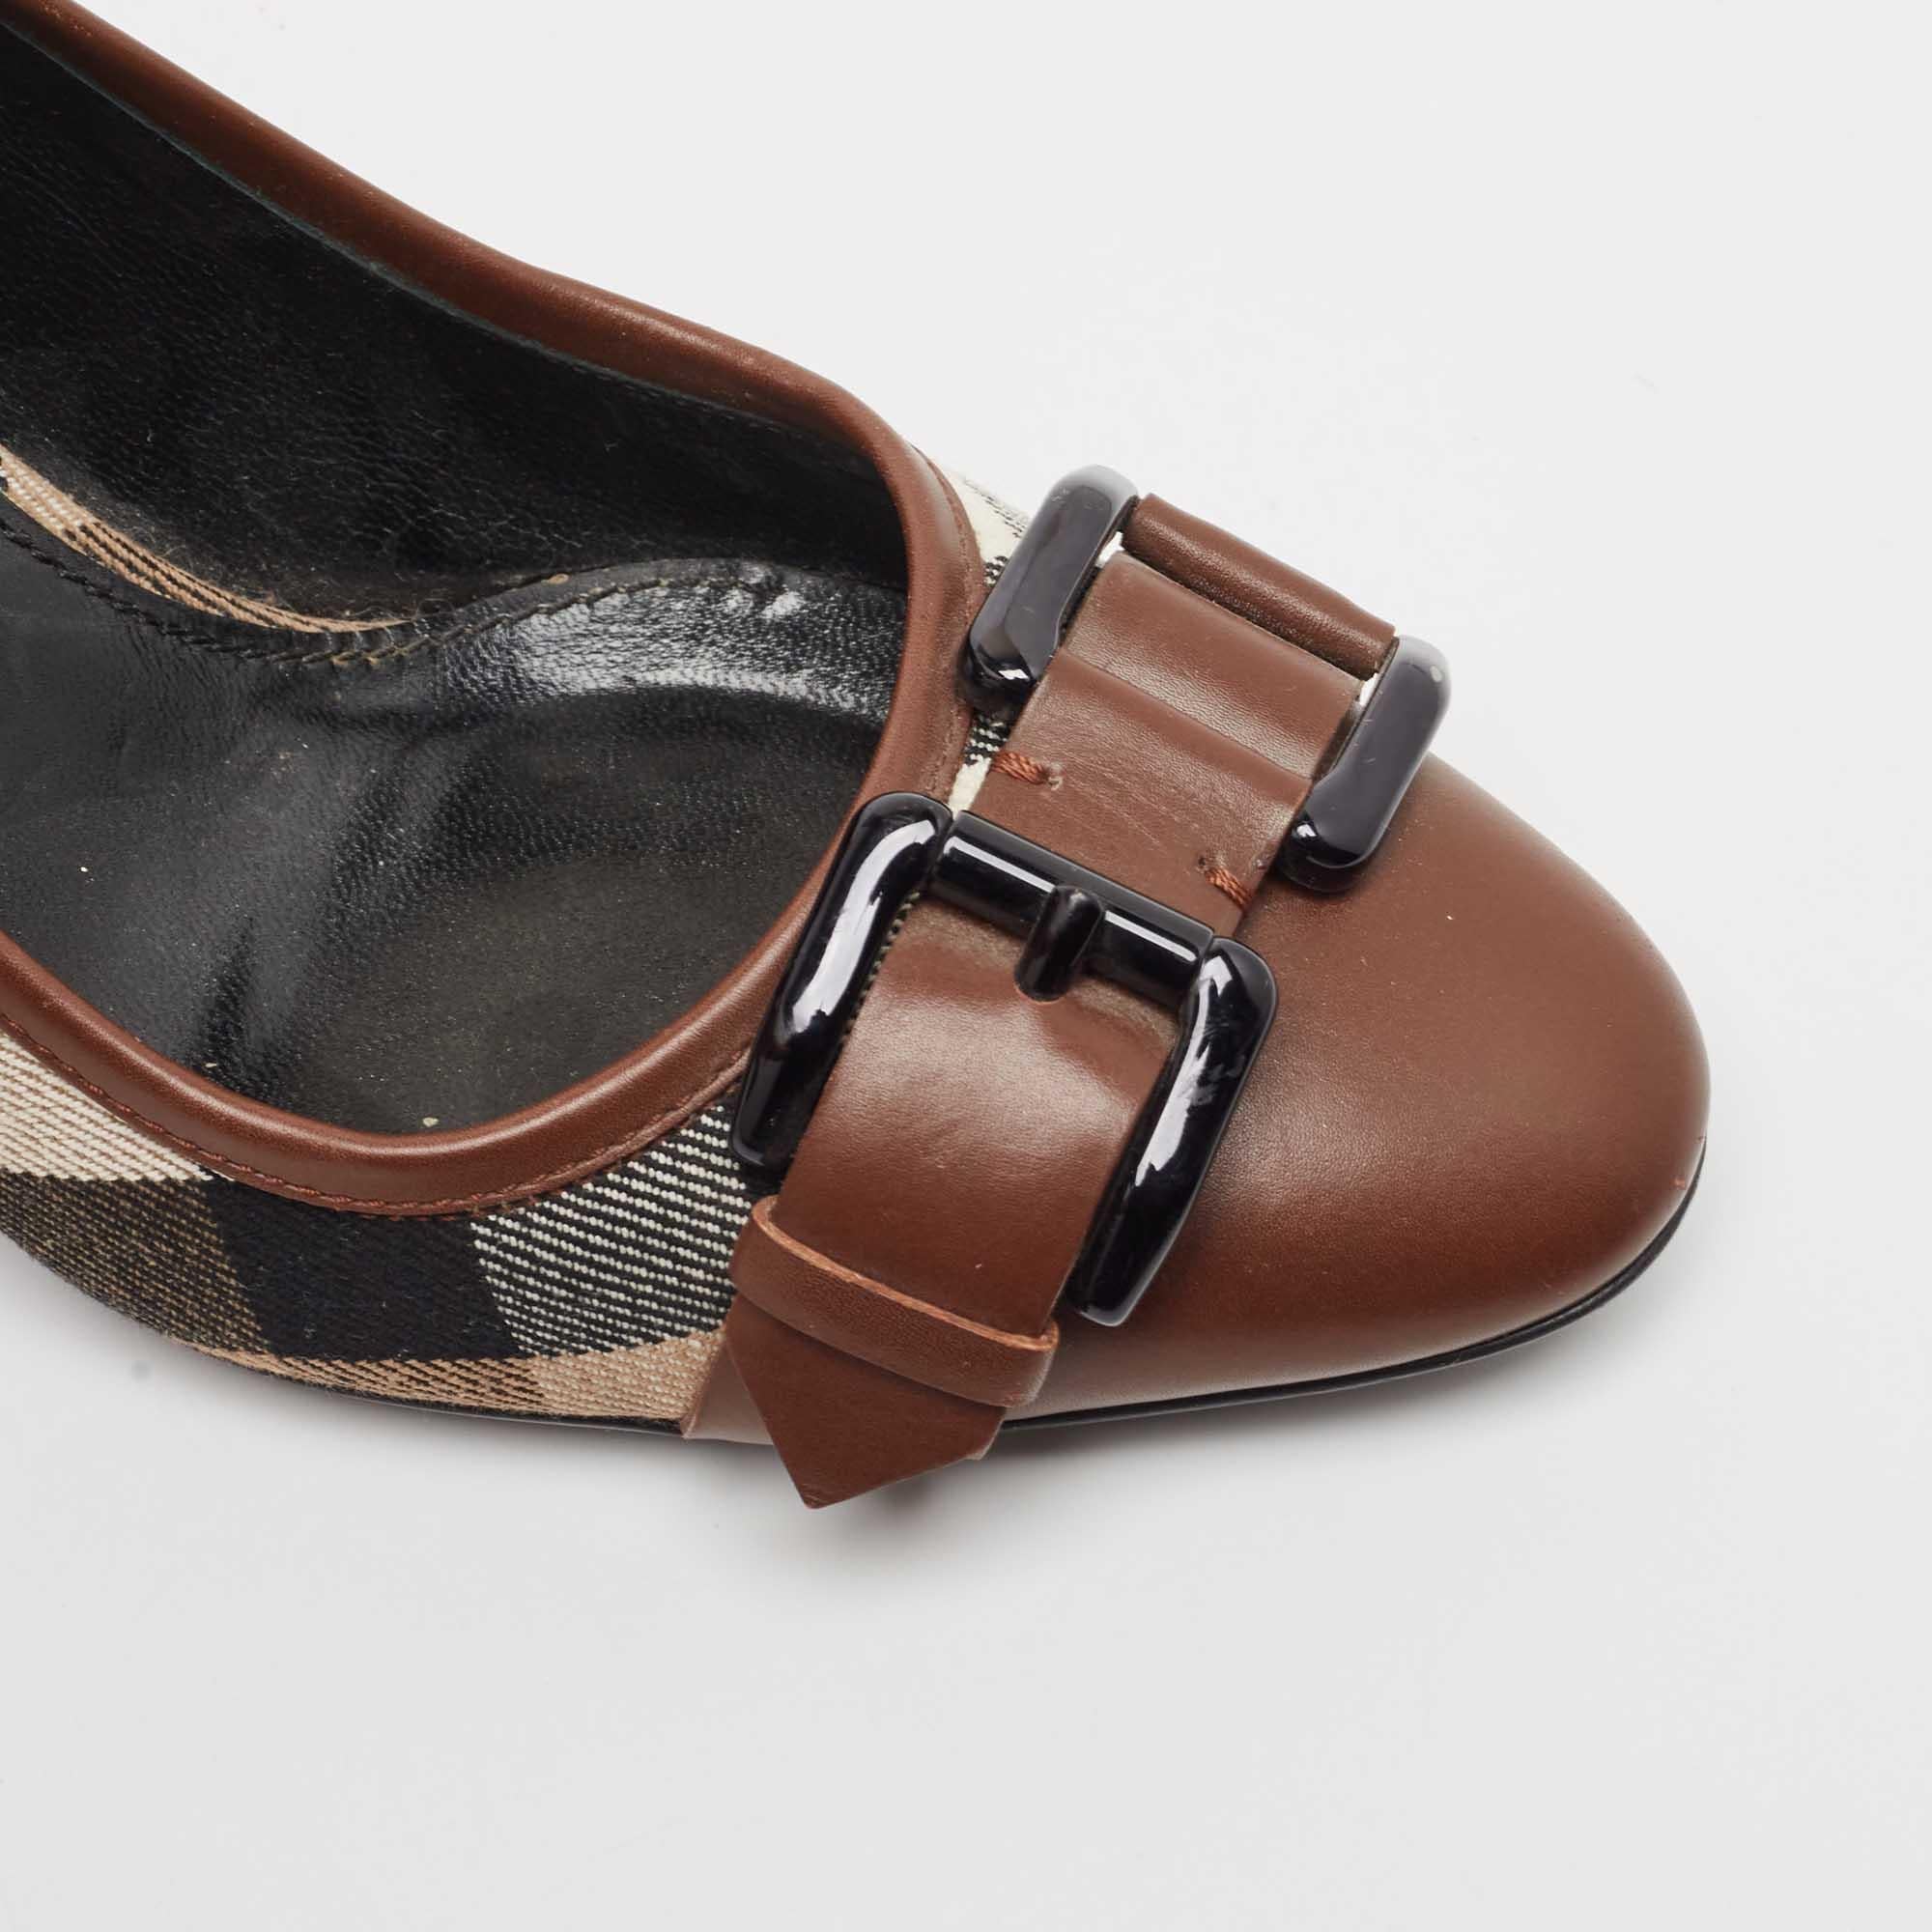 Burberry Brown/Beige Leather and House Check Canvas Buckle Detail Pumps Size 36 For Sale 2